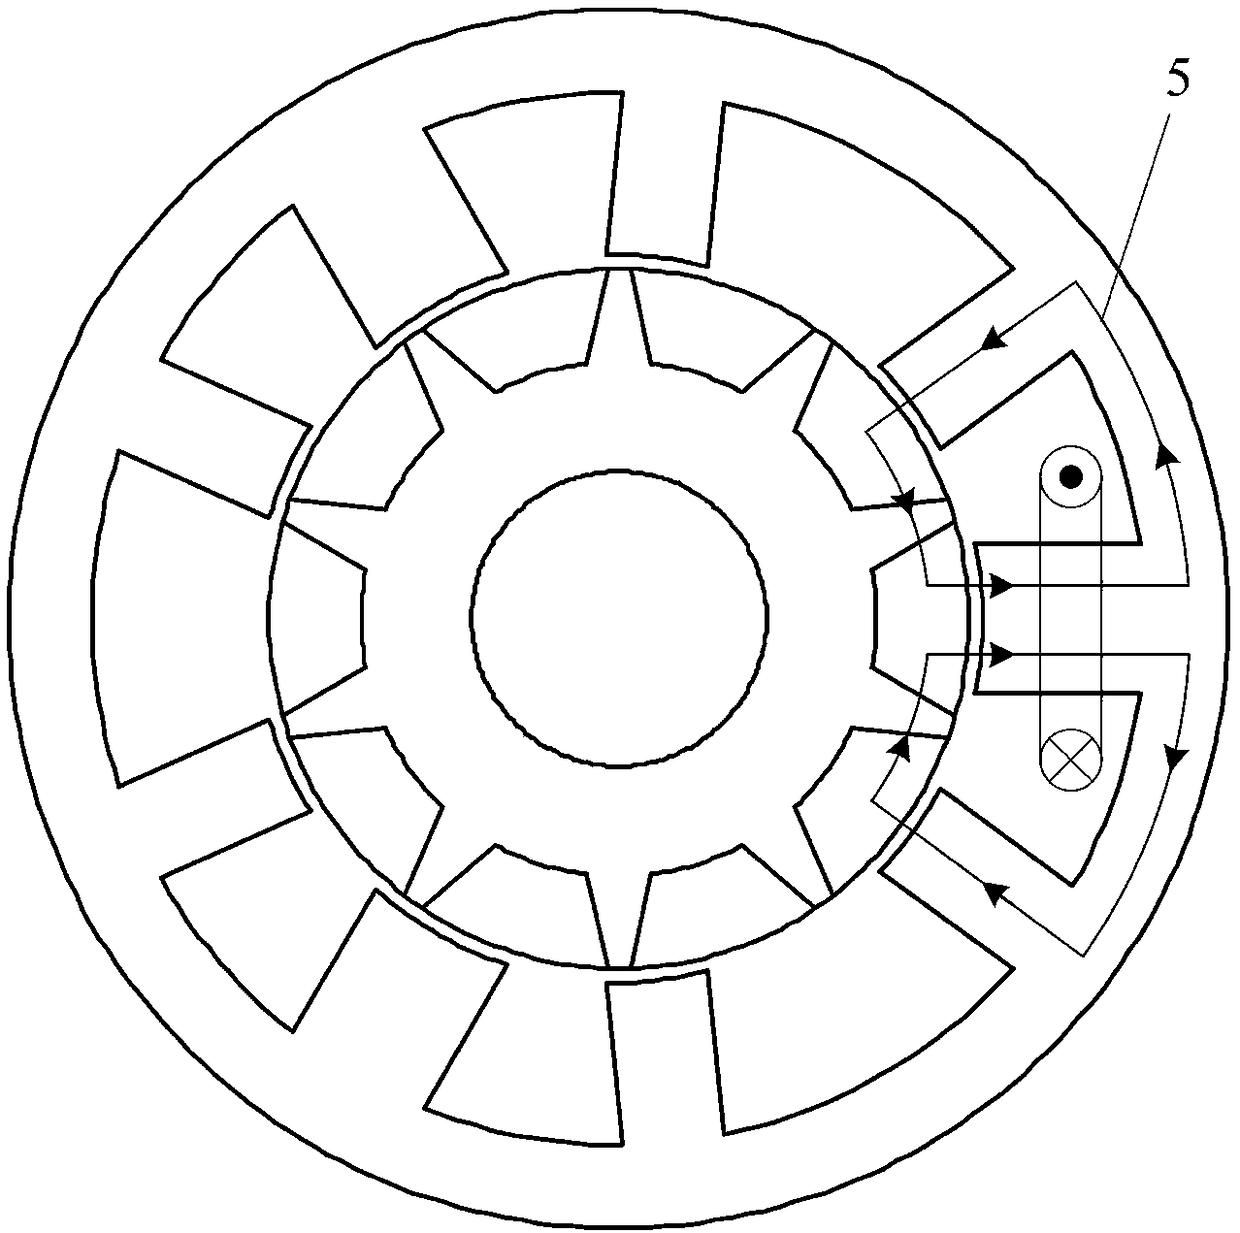 A 9n/10n pole segment rotor switched reluctance motor